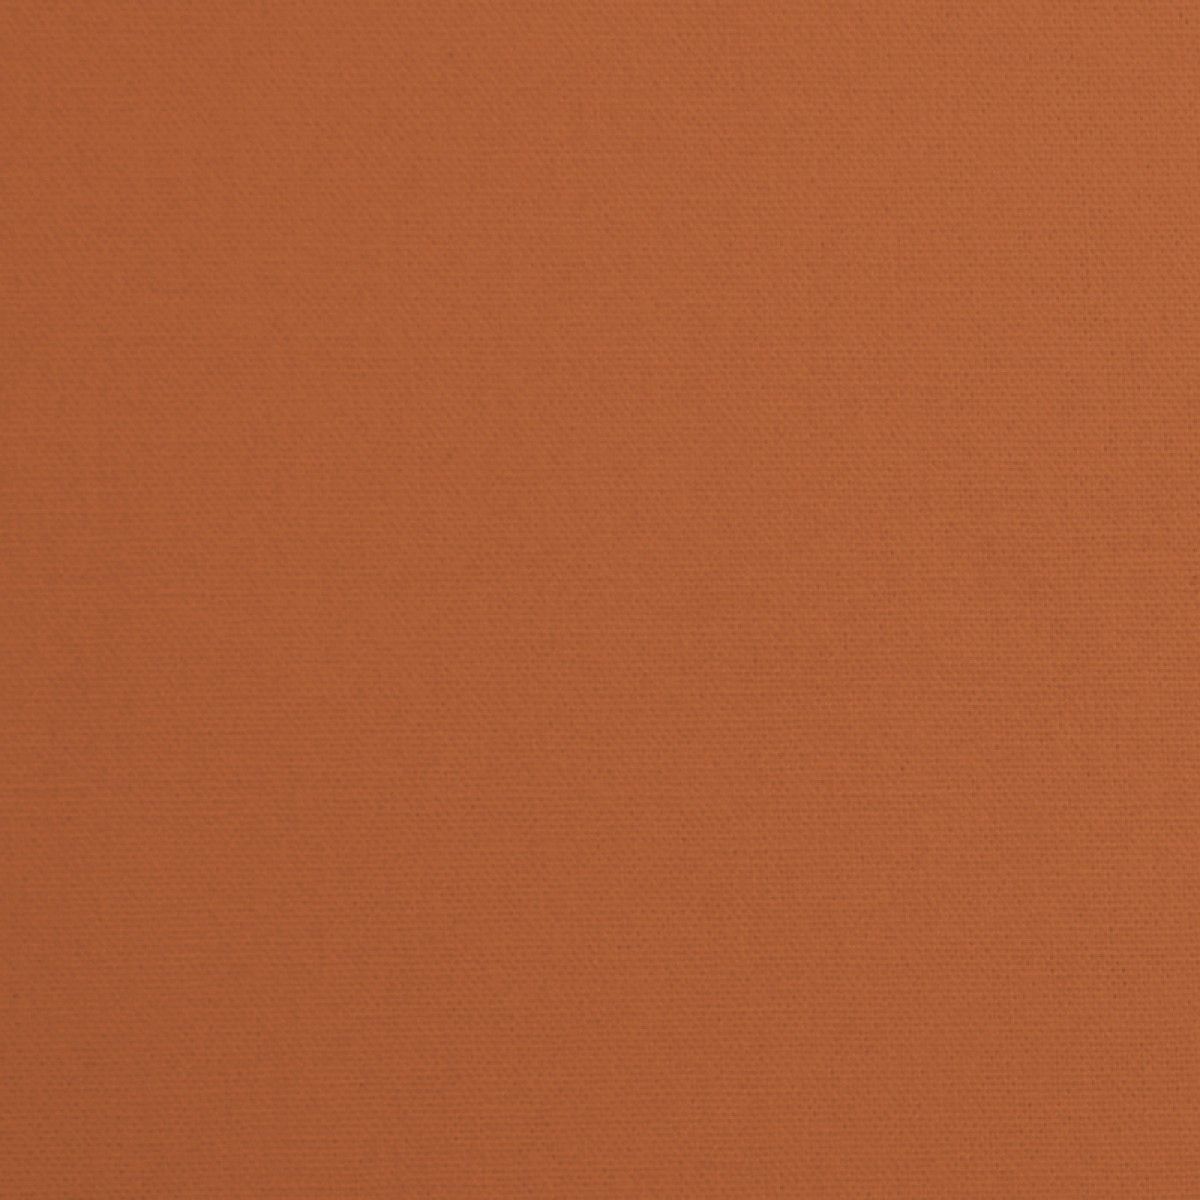 A close up of an orange colored wall - Terracotta